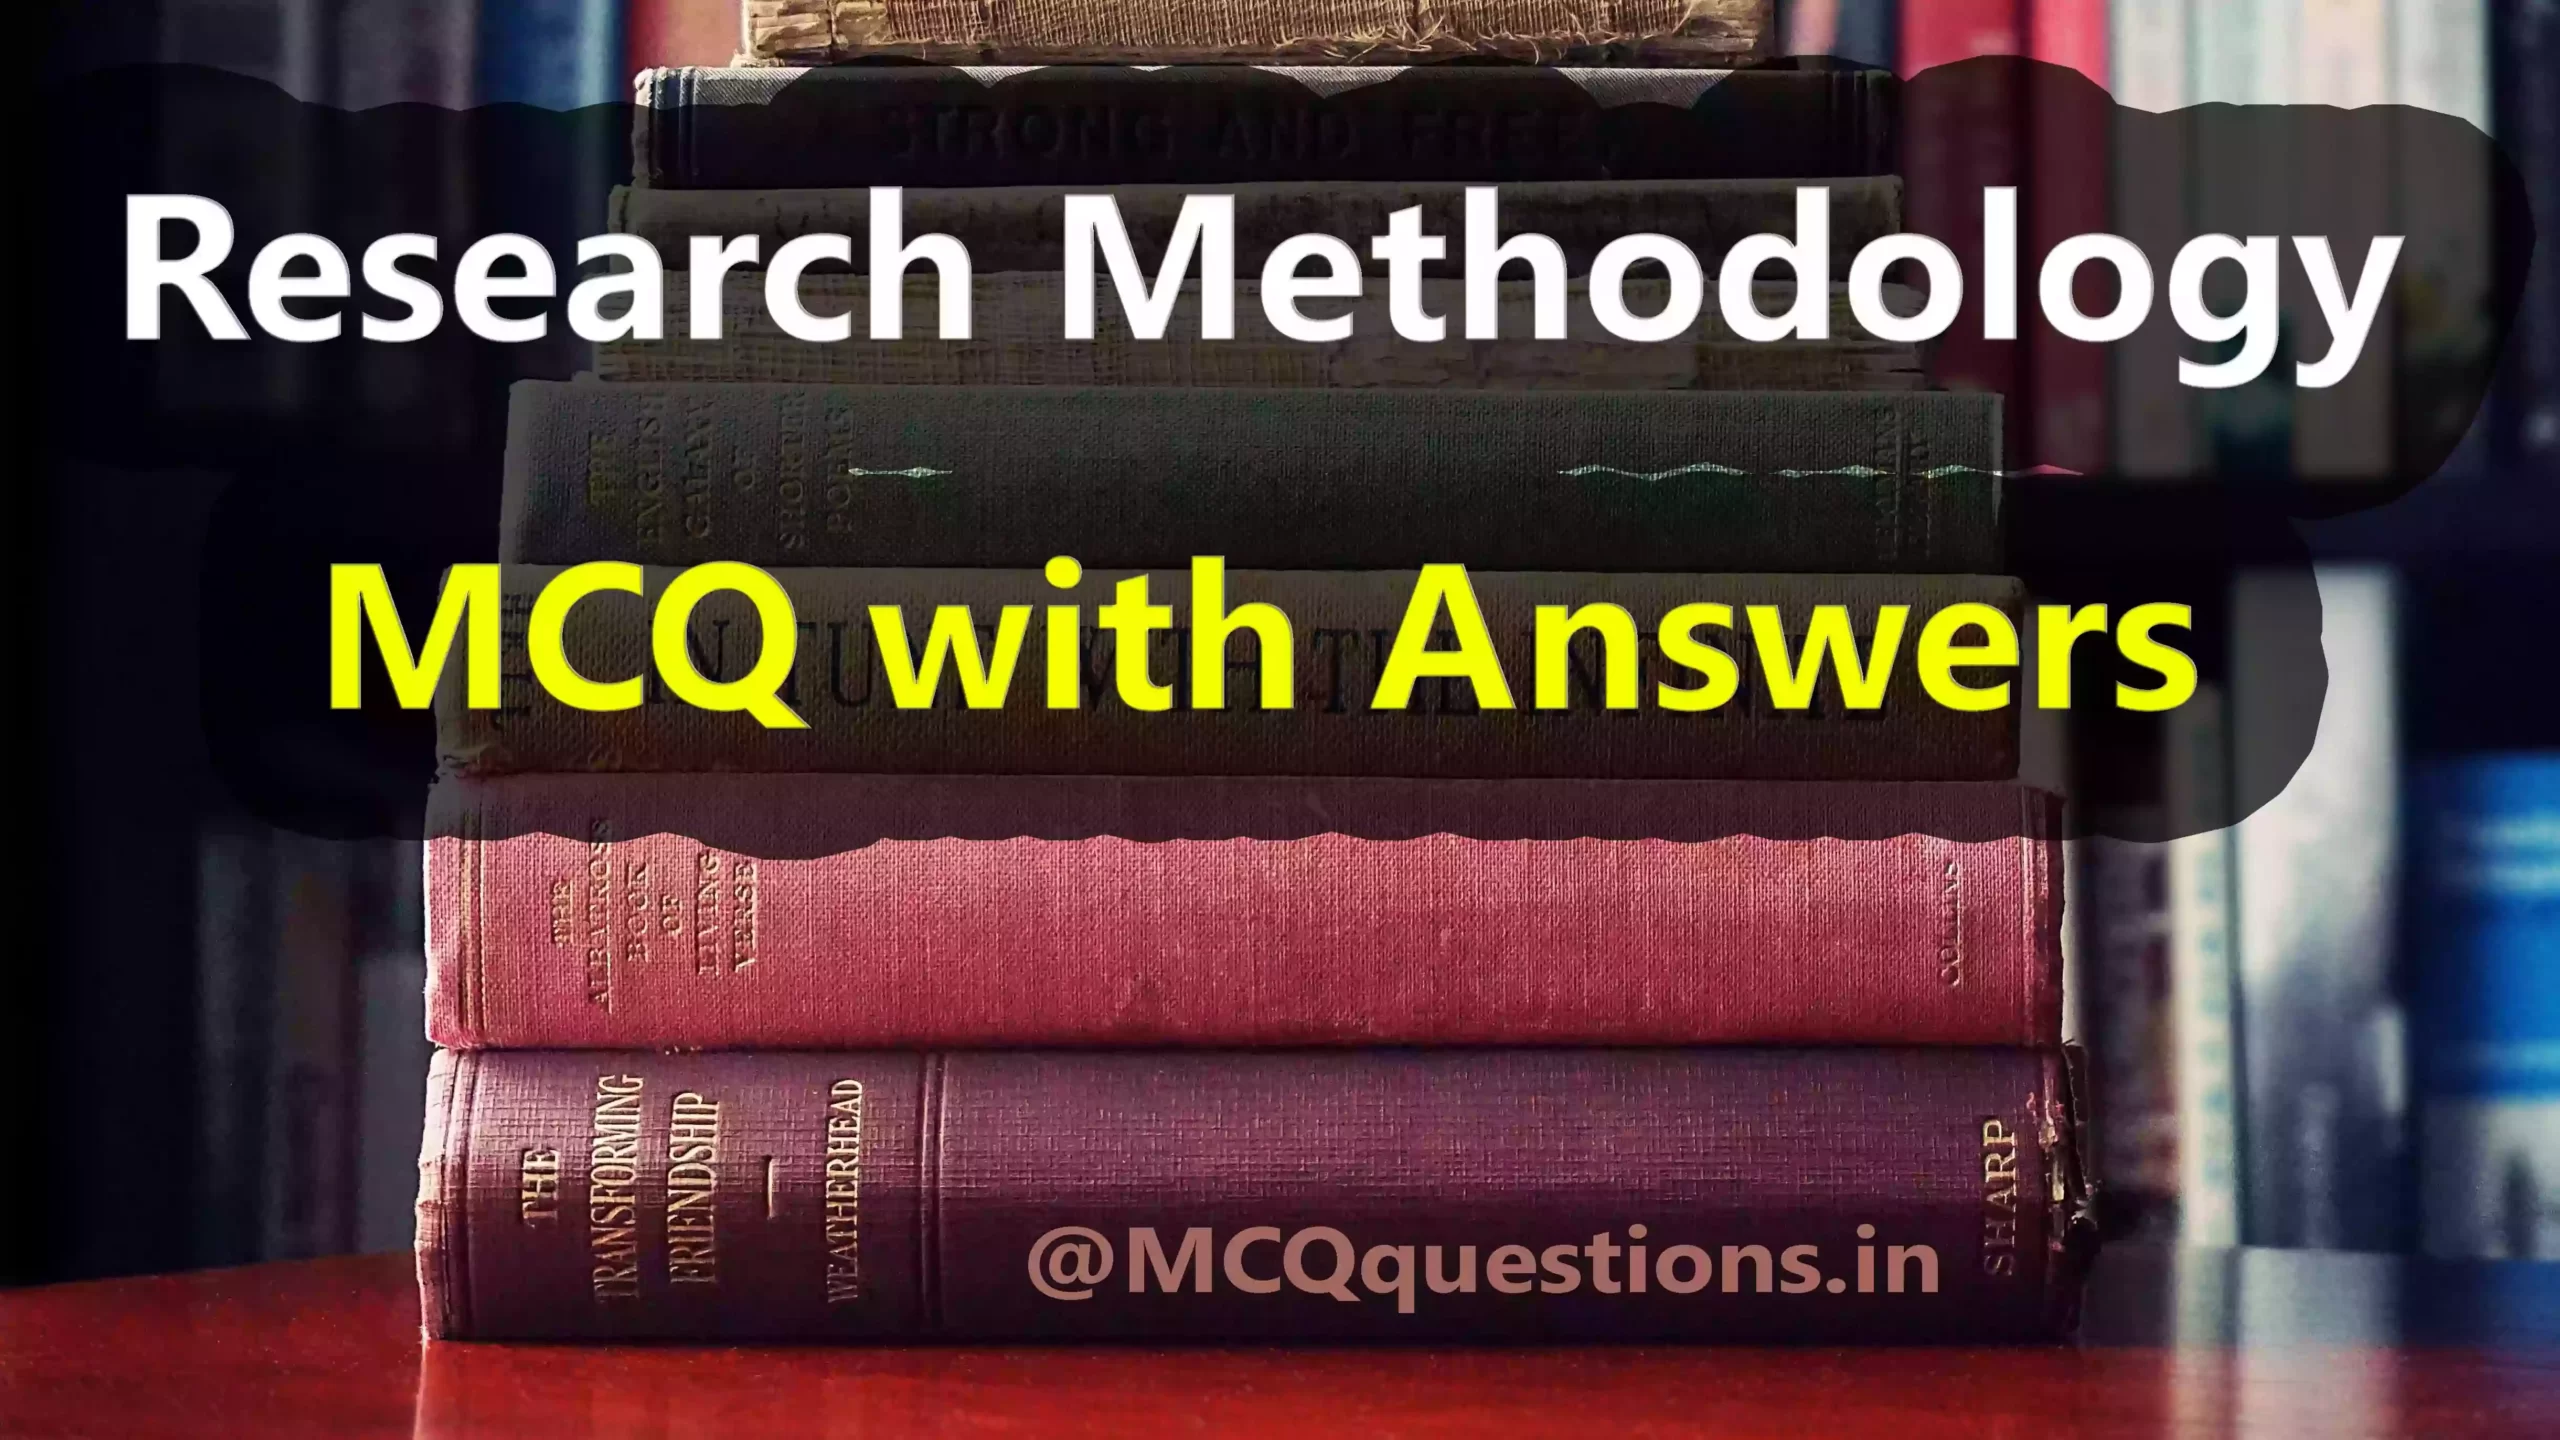 Research Methodology MCQ with Answers